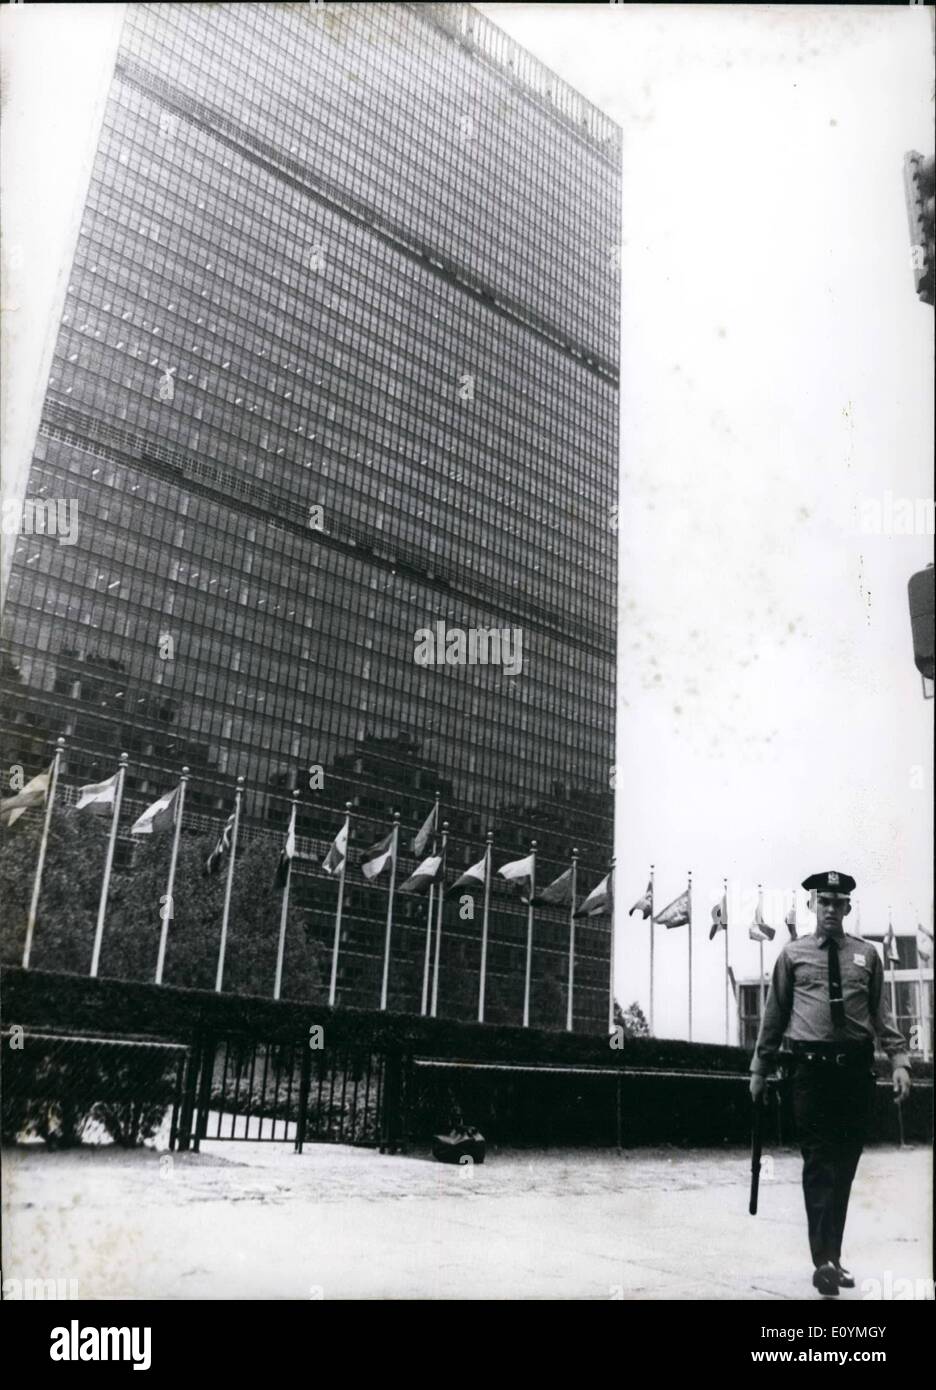 Oct. 10, 1970 - 25years United Nations: Festivities take place in New York between October 14th and October 24th because of the Stock Photo